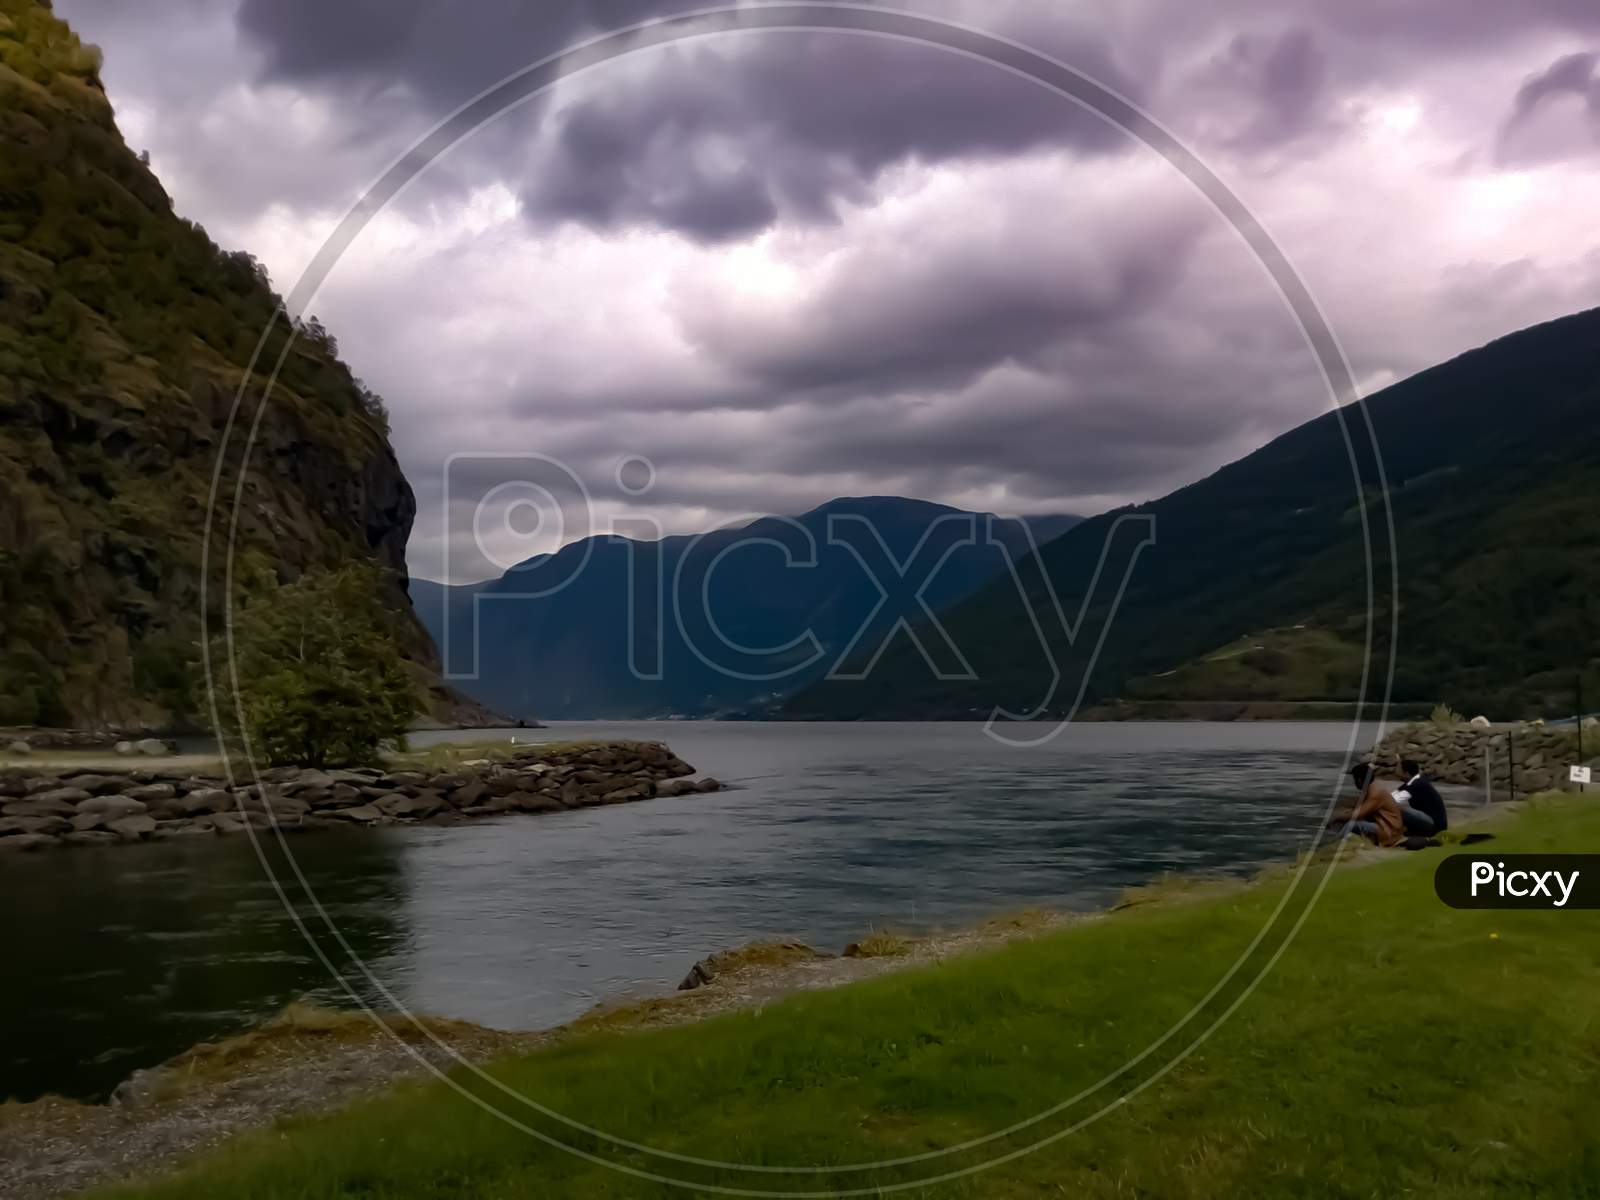 View Of Lake And Mountains Under Cloudy Sky Near Flam Cruise Port Norway